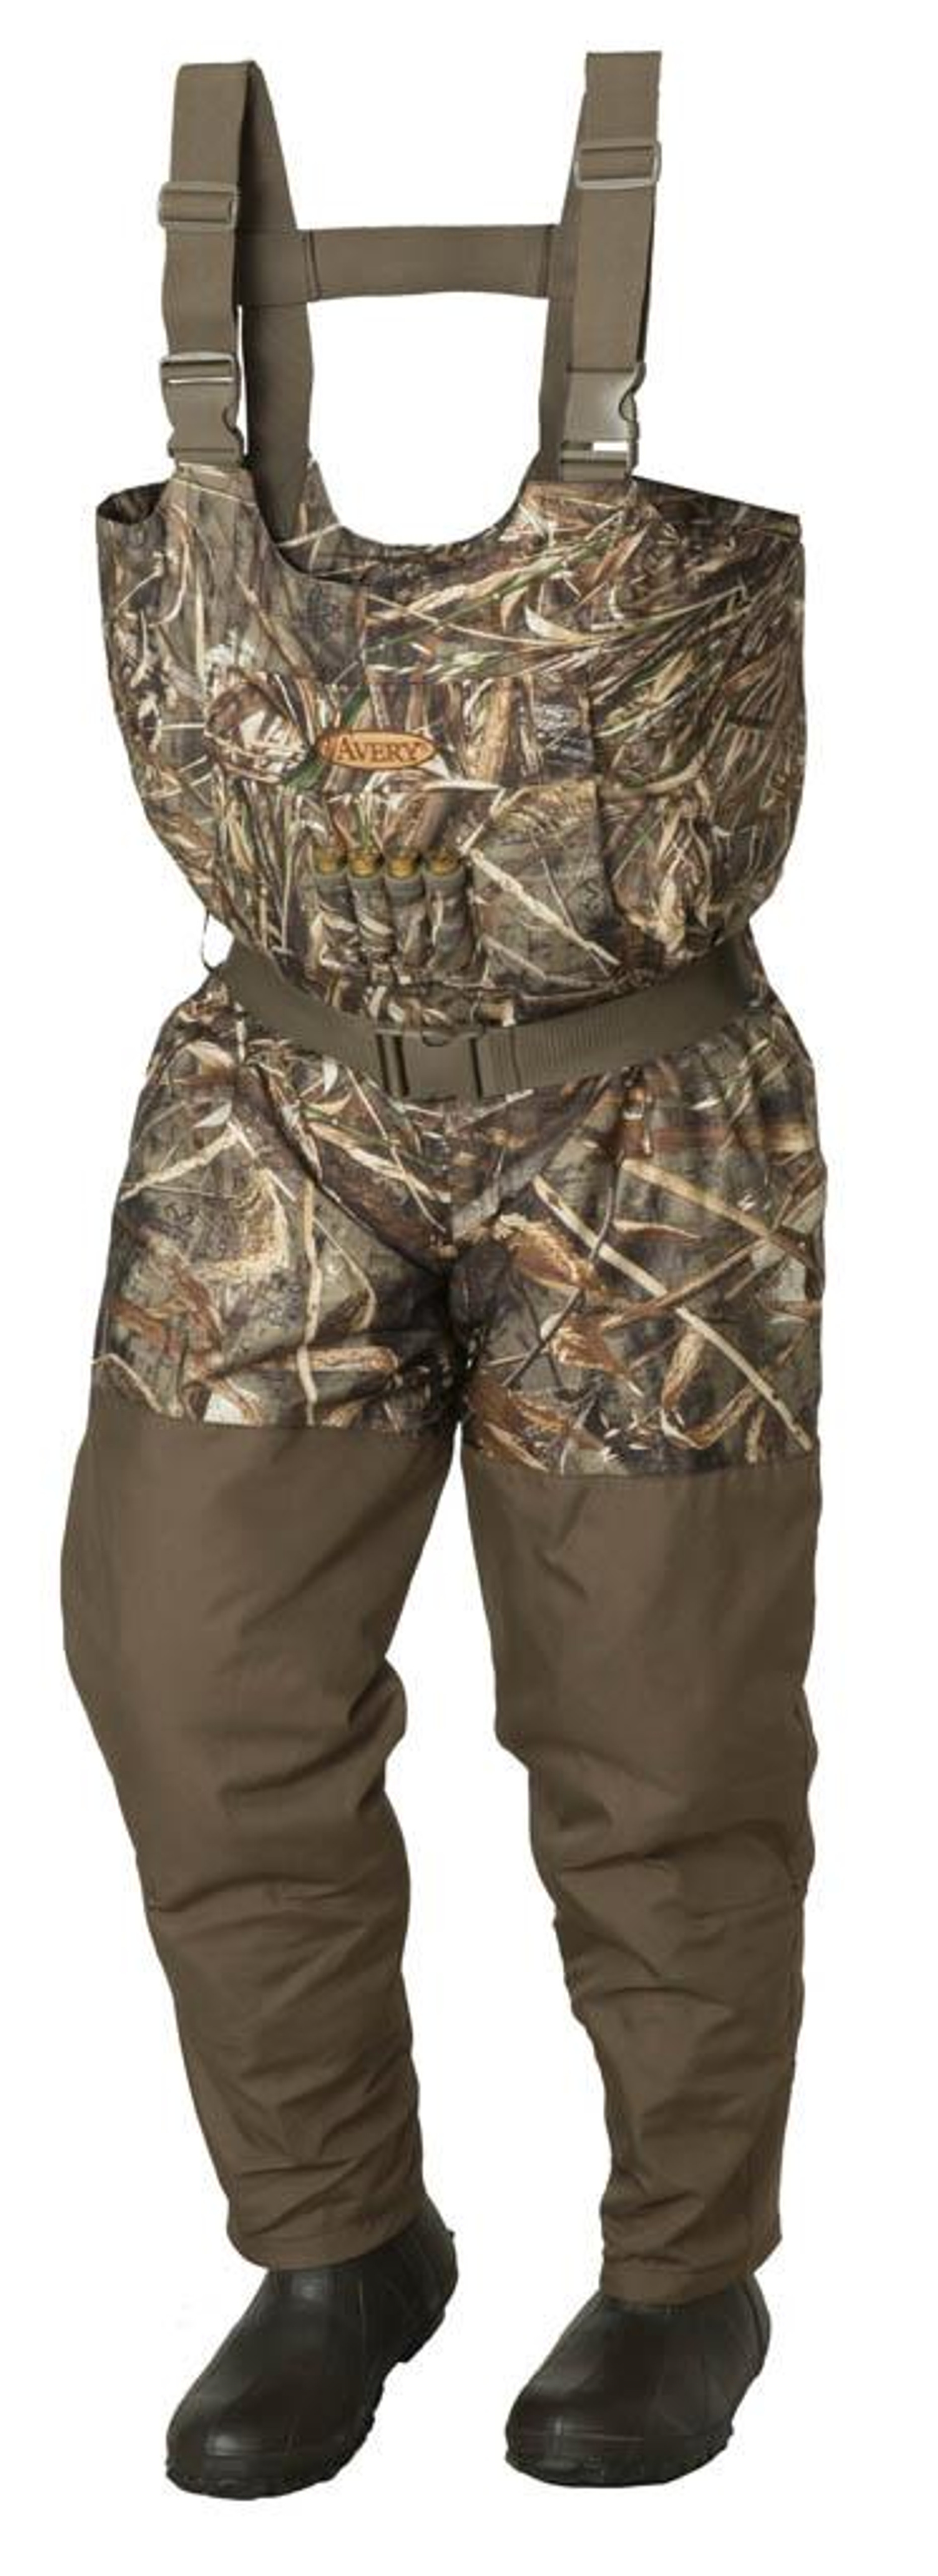 Avery Breathable Insulated Wader - Simmons Sporting Goods